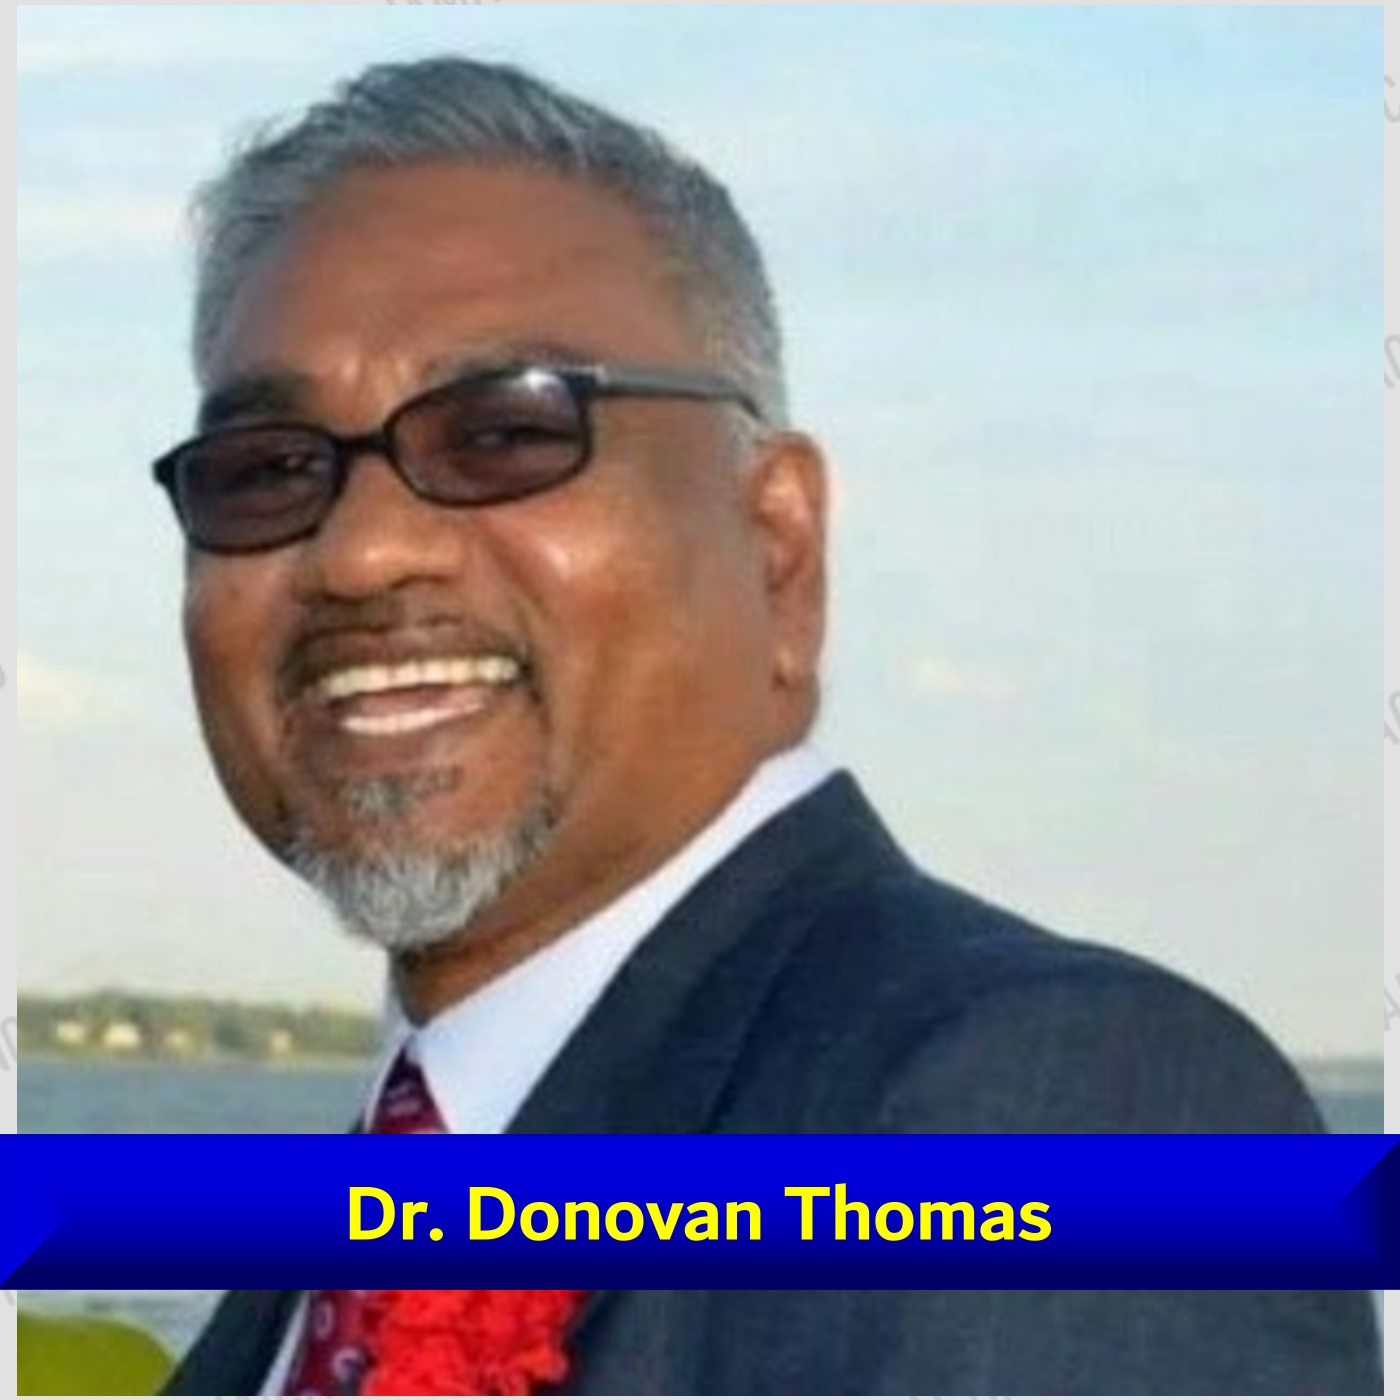 Donovan Thomas would kill to end suicide